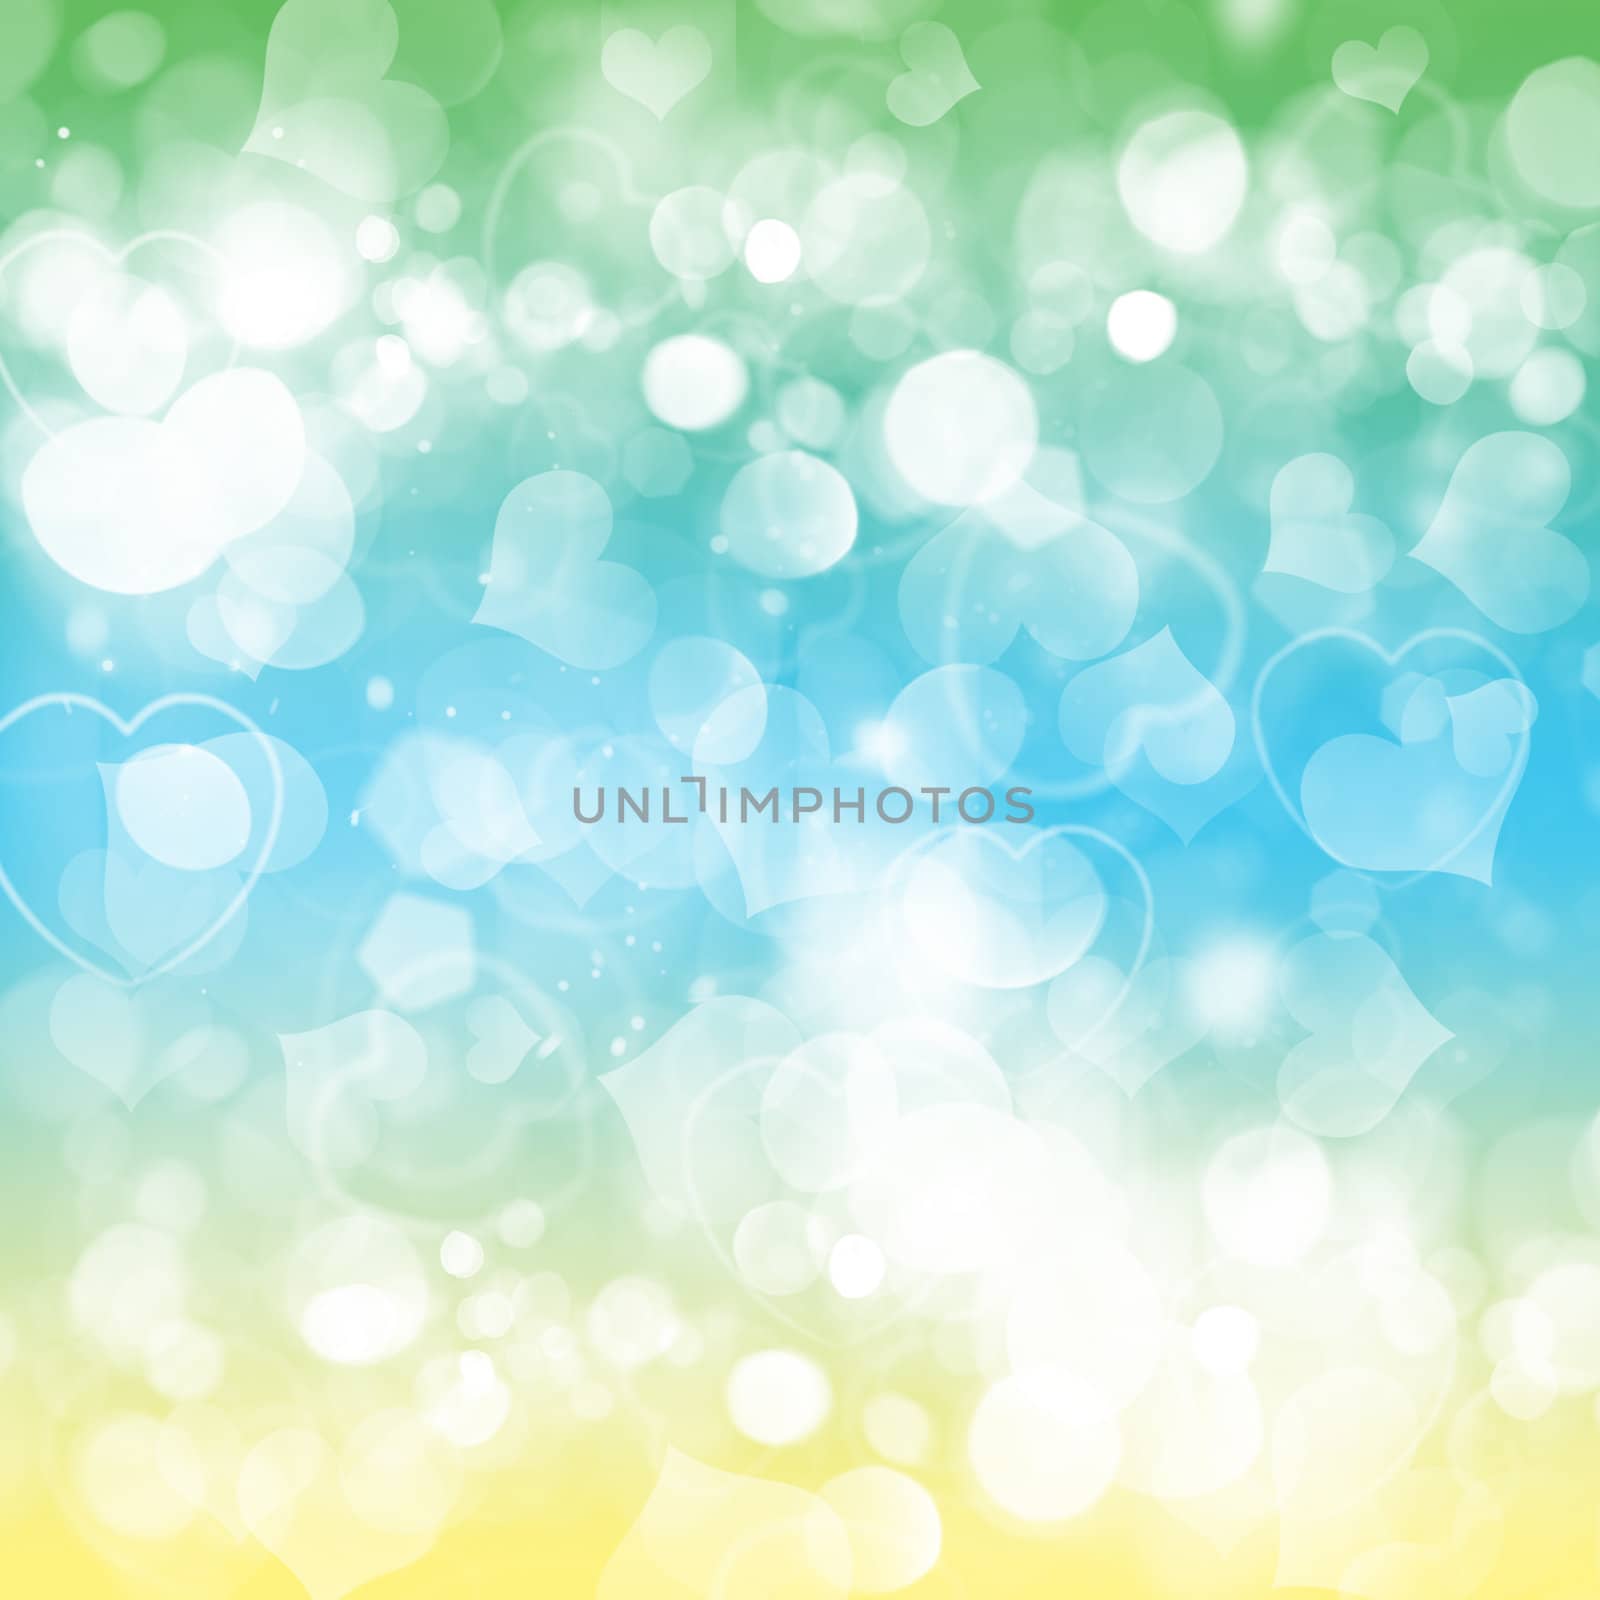 Gradient backgrounds in different colors, with a sparkling bokeh style effect.